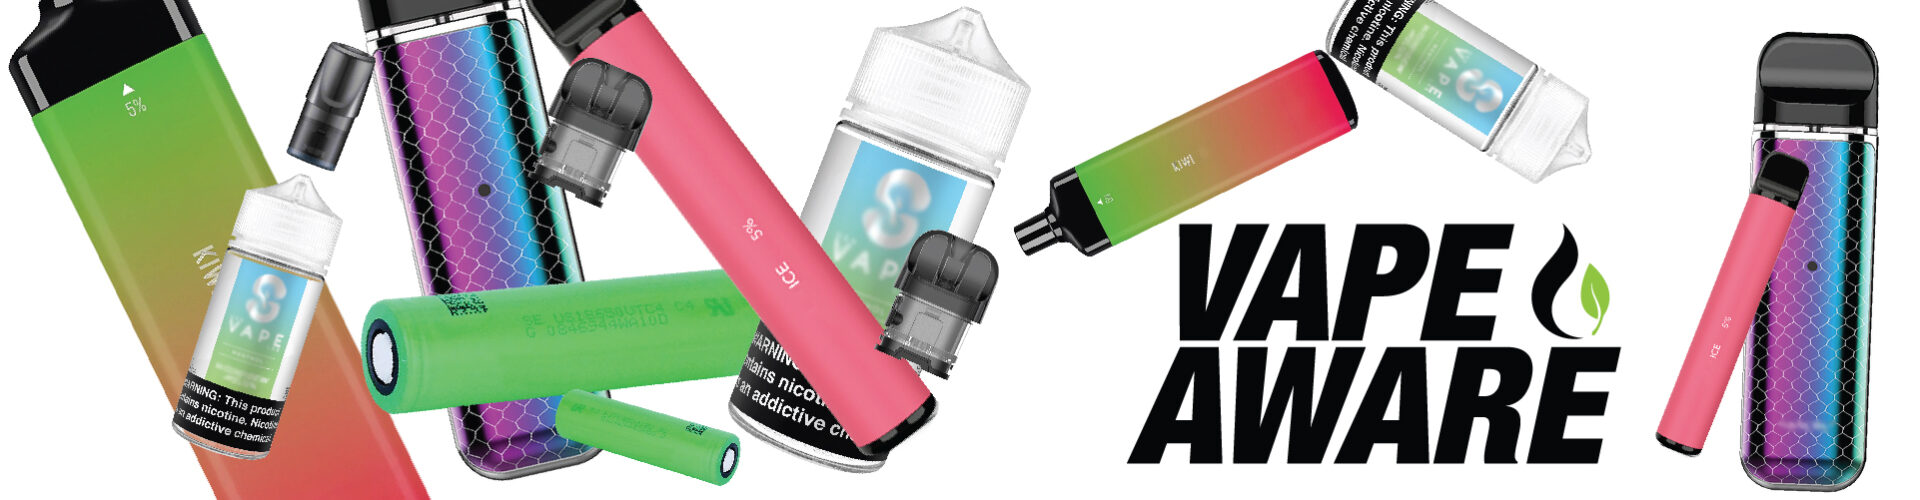 images of different types of vaping devices, cartridges, batteries, and other vaping accessories